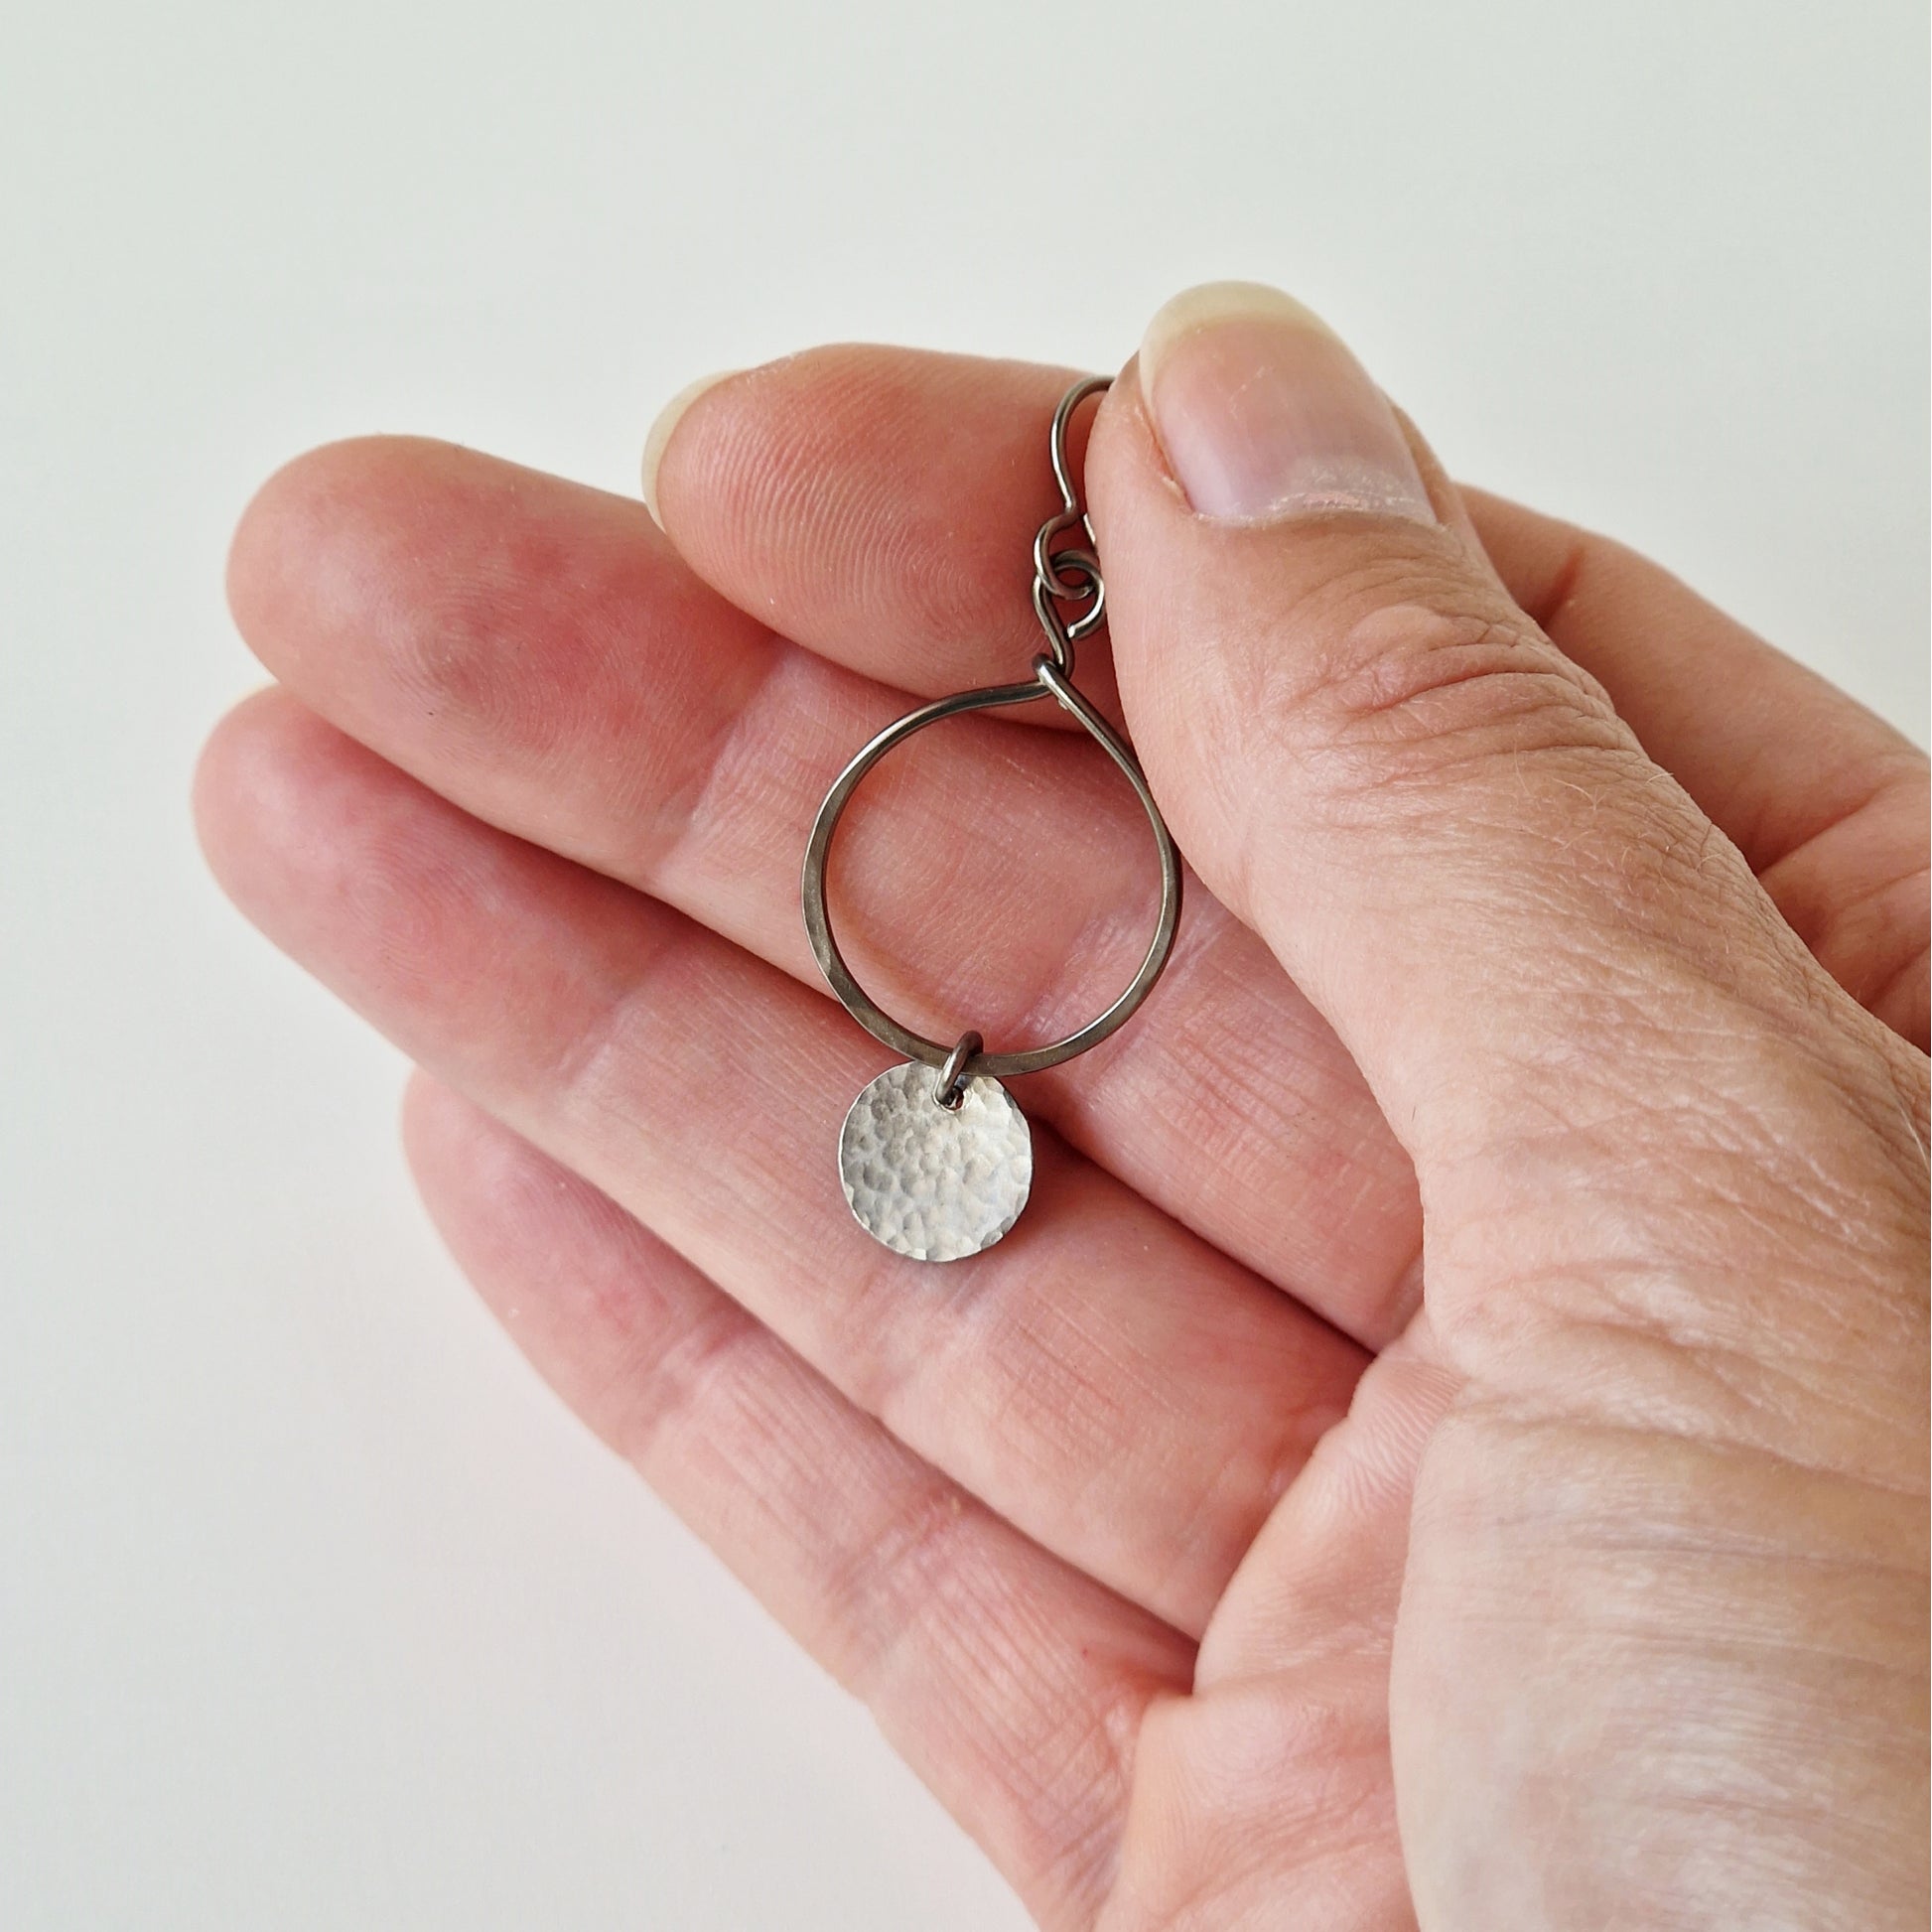  Titanium Earrings Open Circle with Tiny Disc on Hand